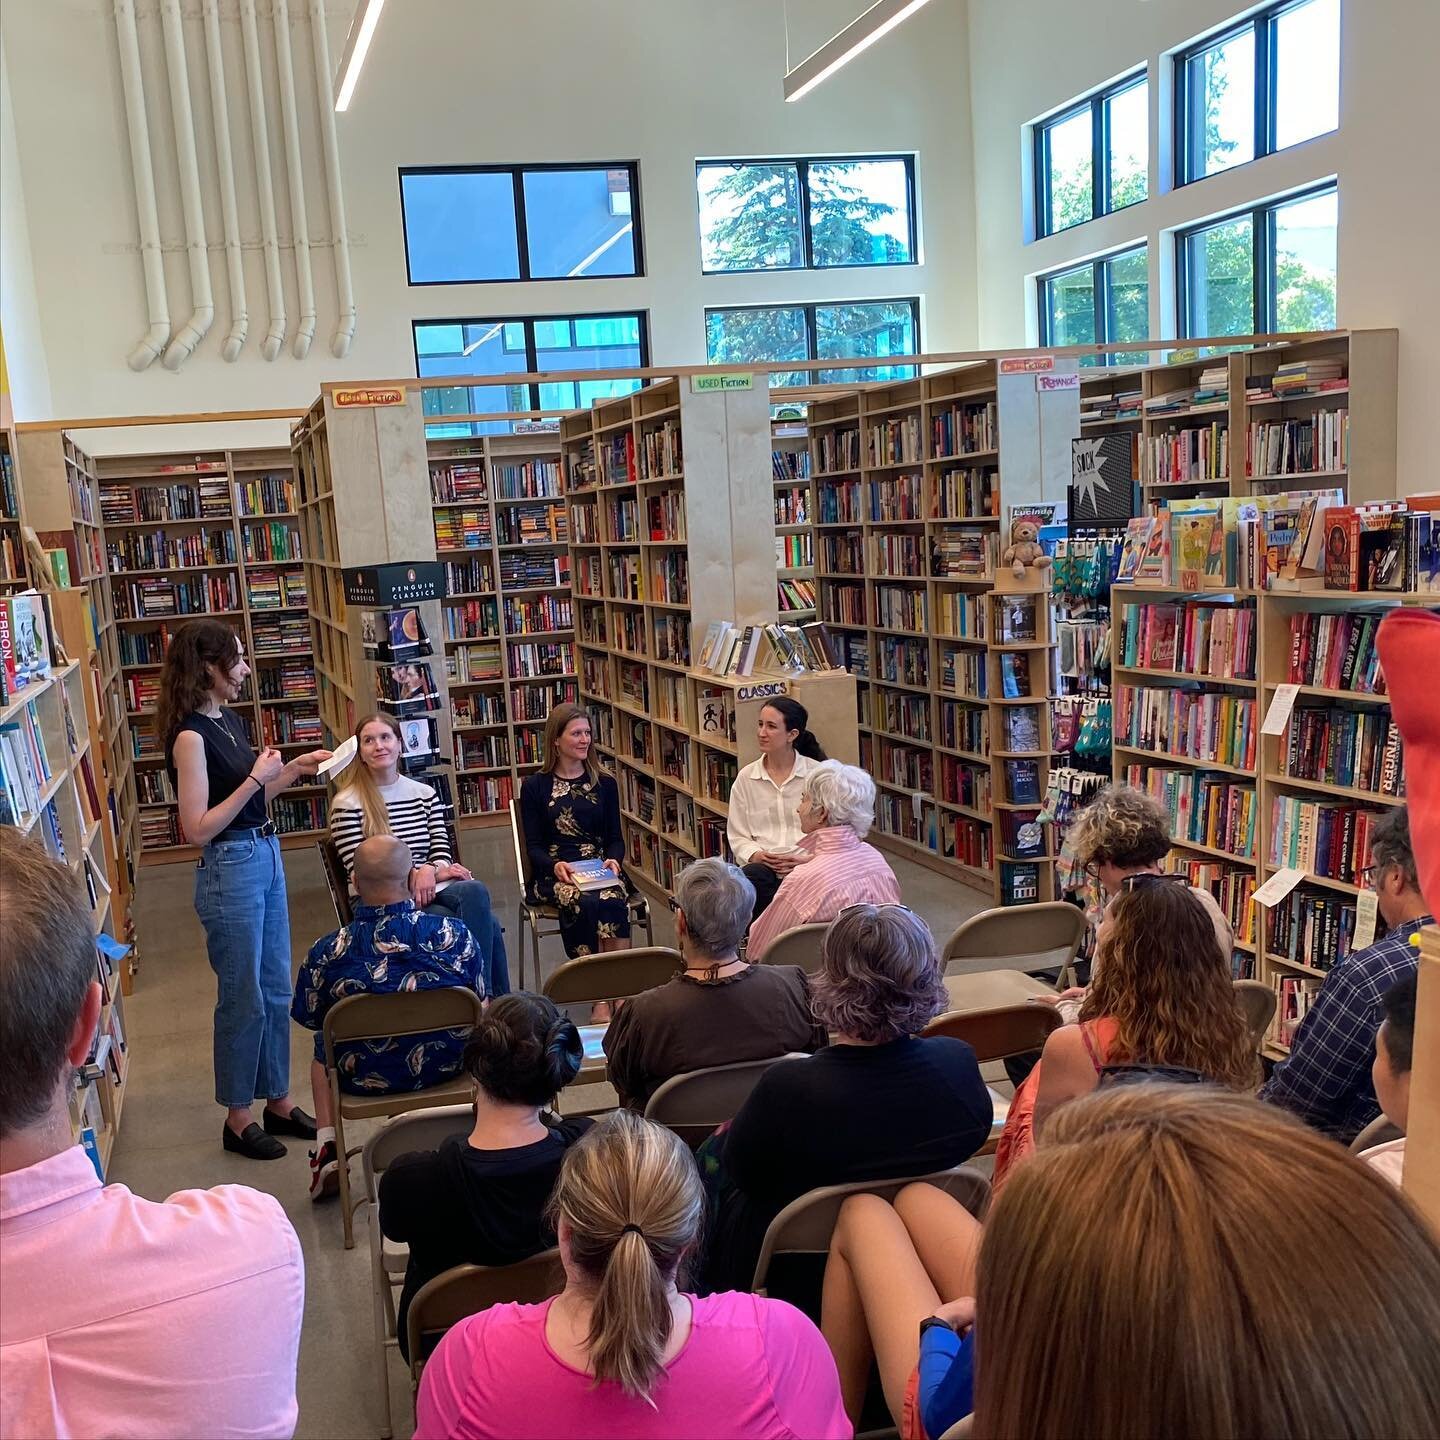 Thank you to #napabookmine for hosting us yesterday and to all who joined us! Thank you also to Dr. Bridget Keenan for facilitating the wonderful discussion with the group!